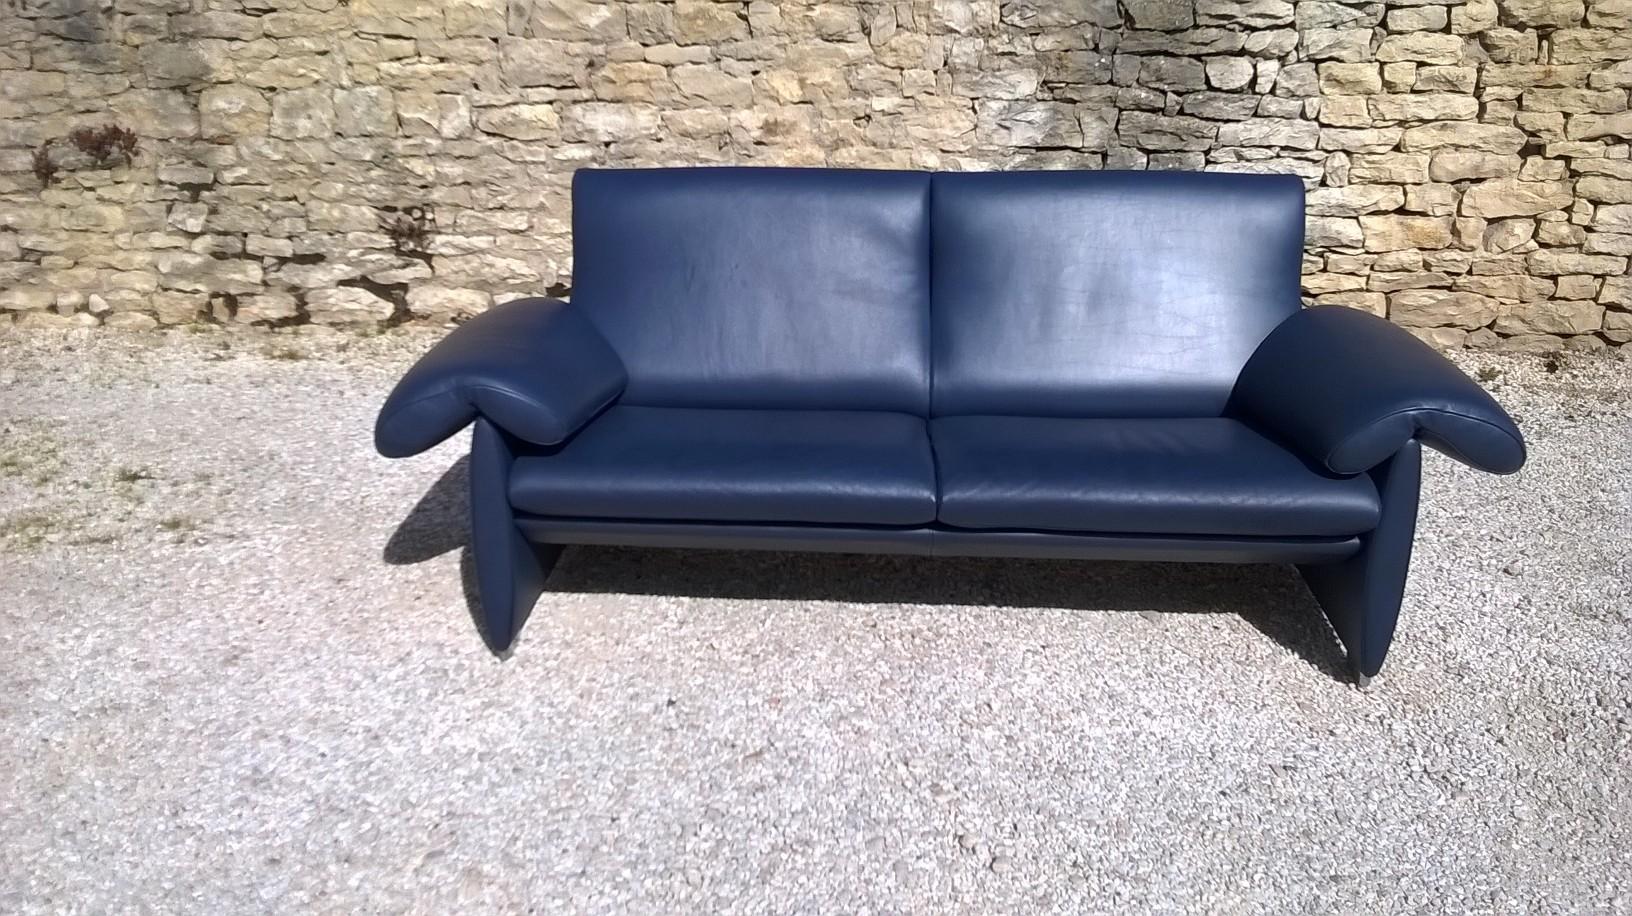 Beautiful leather sofa De Sede DS10/02 
Blue leather
Excellent condition
circa 2000
207cm x 85cm x 83cm high approx. 
Seat height 42cm approx.
1600 Euros (value 5500).
 